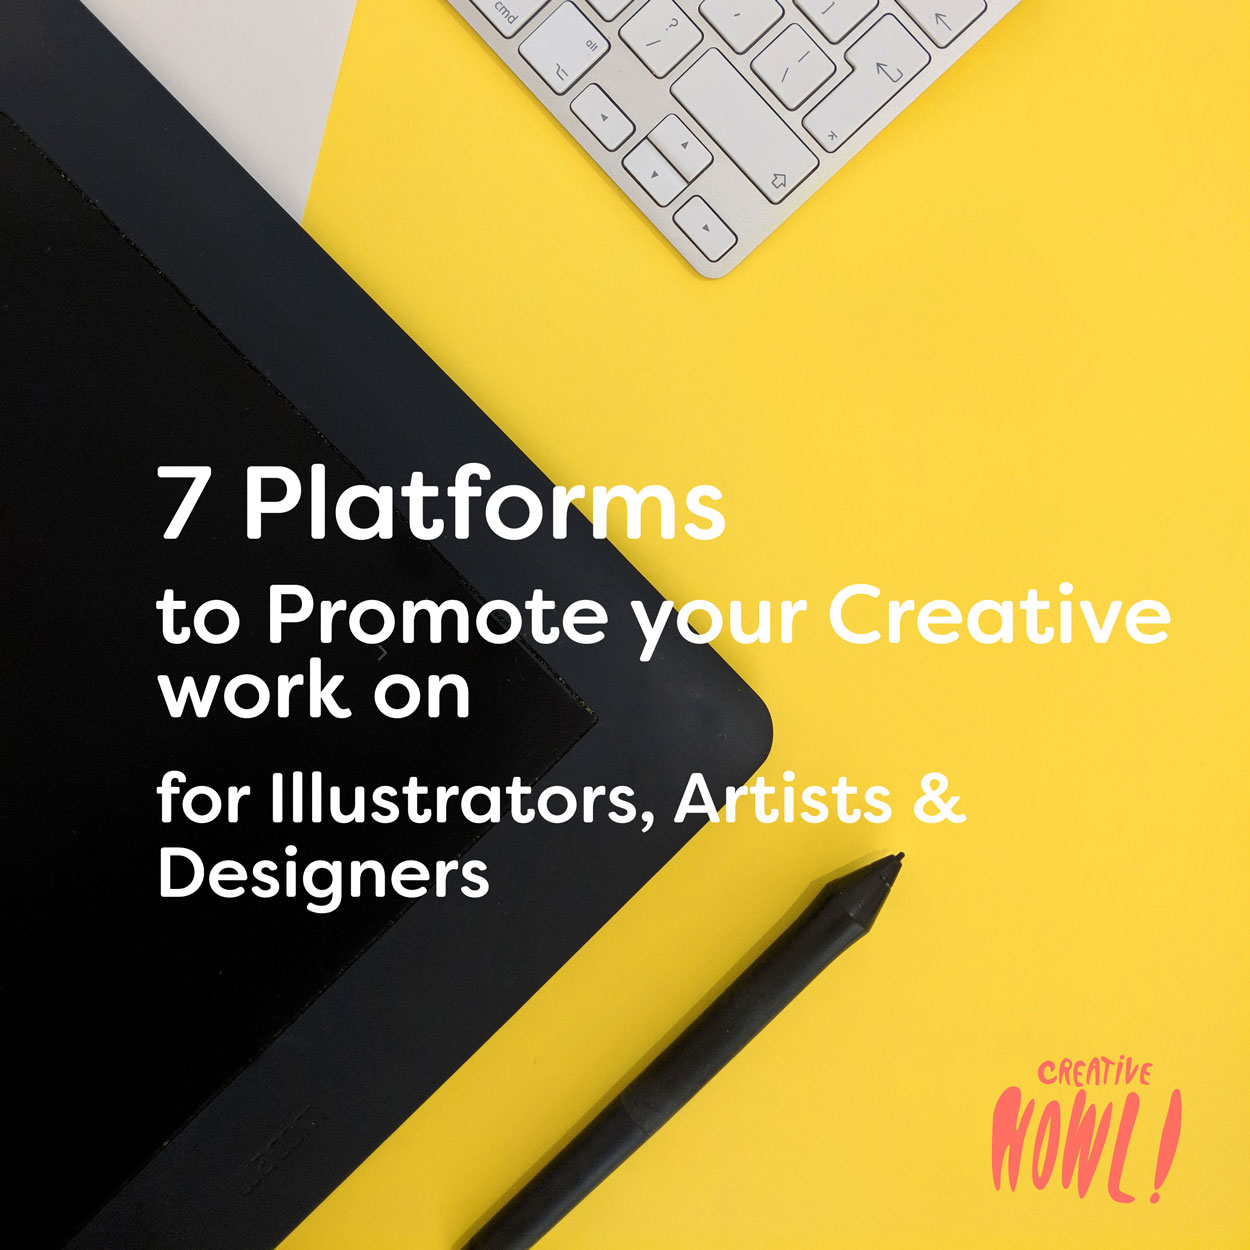 7 Platforms to Promote your Creative work on